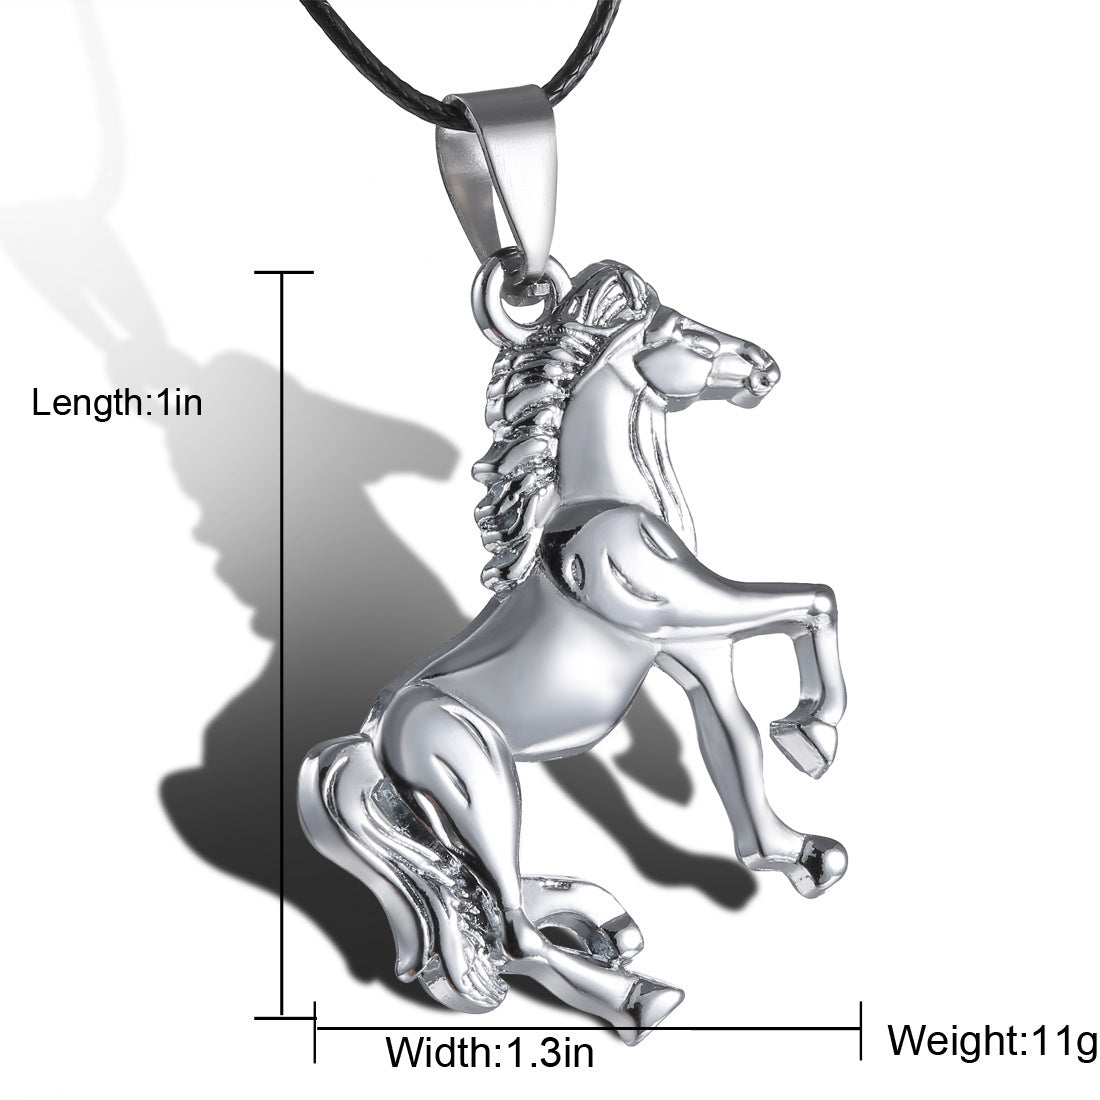 Horse Charm: New Fashion Animal Jewelry for Men and Women.